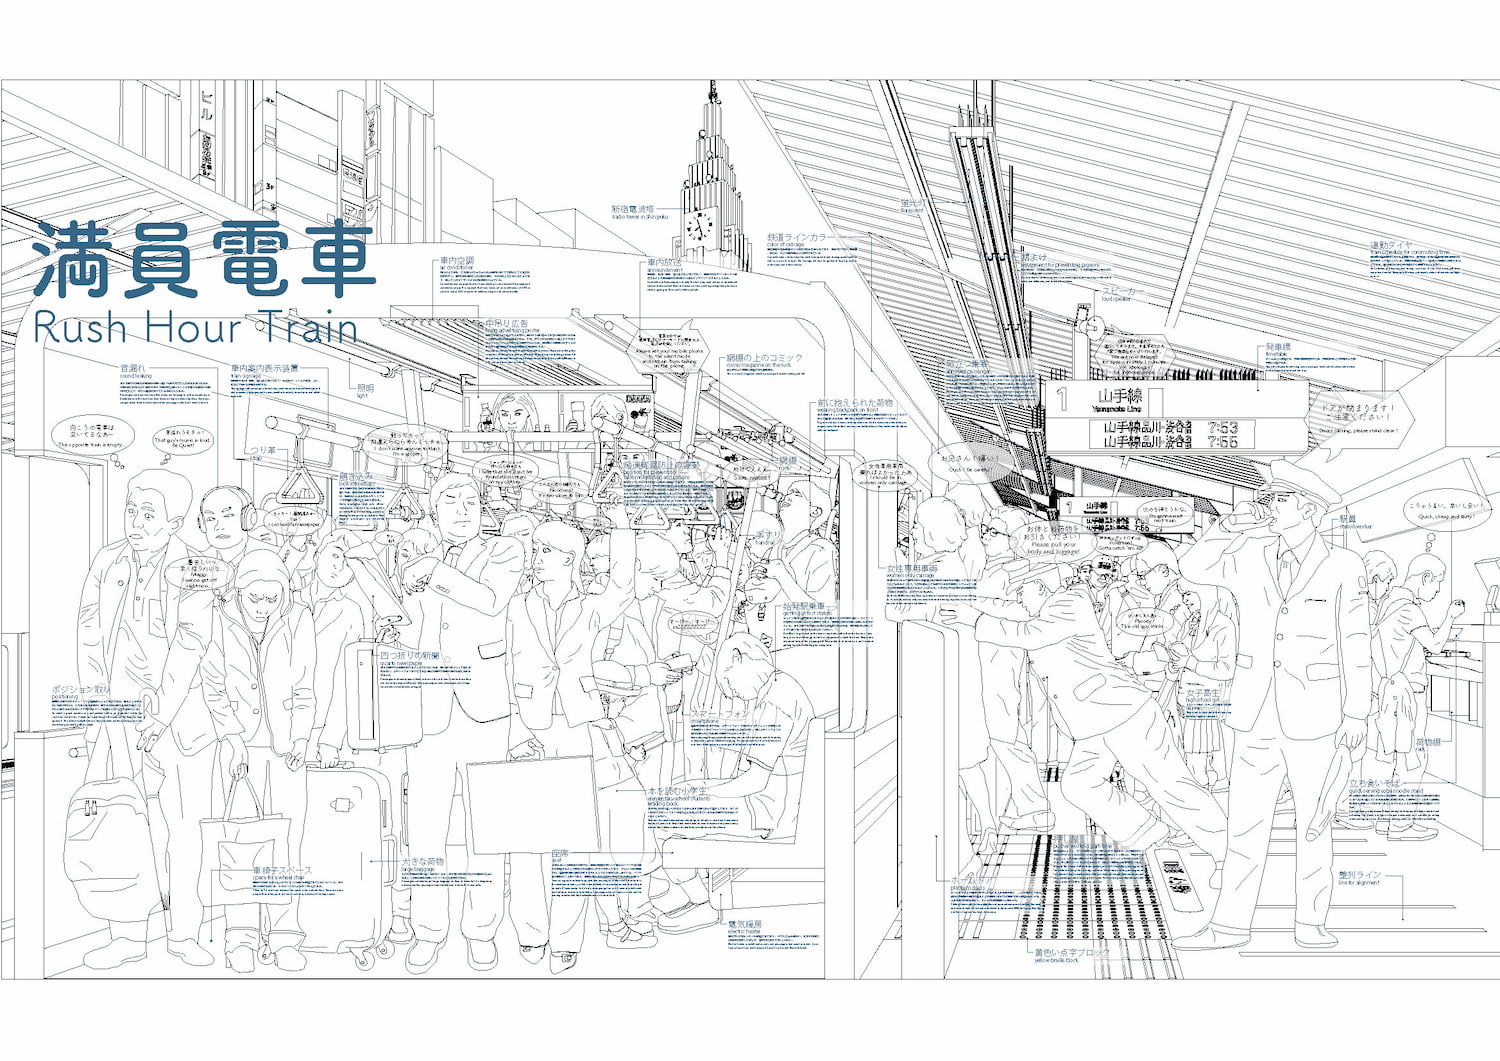 An illustration of a cross-section of a train at a platform in Tokyo's rush hour